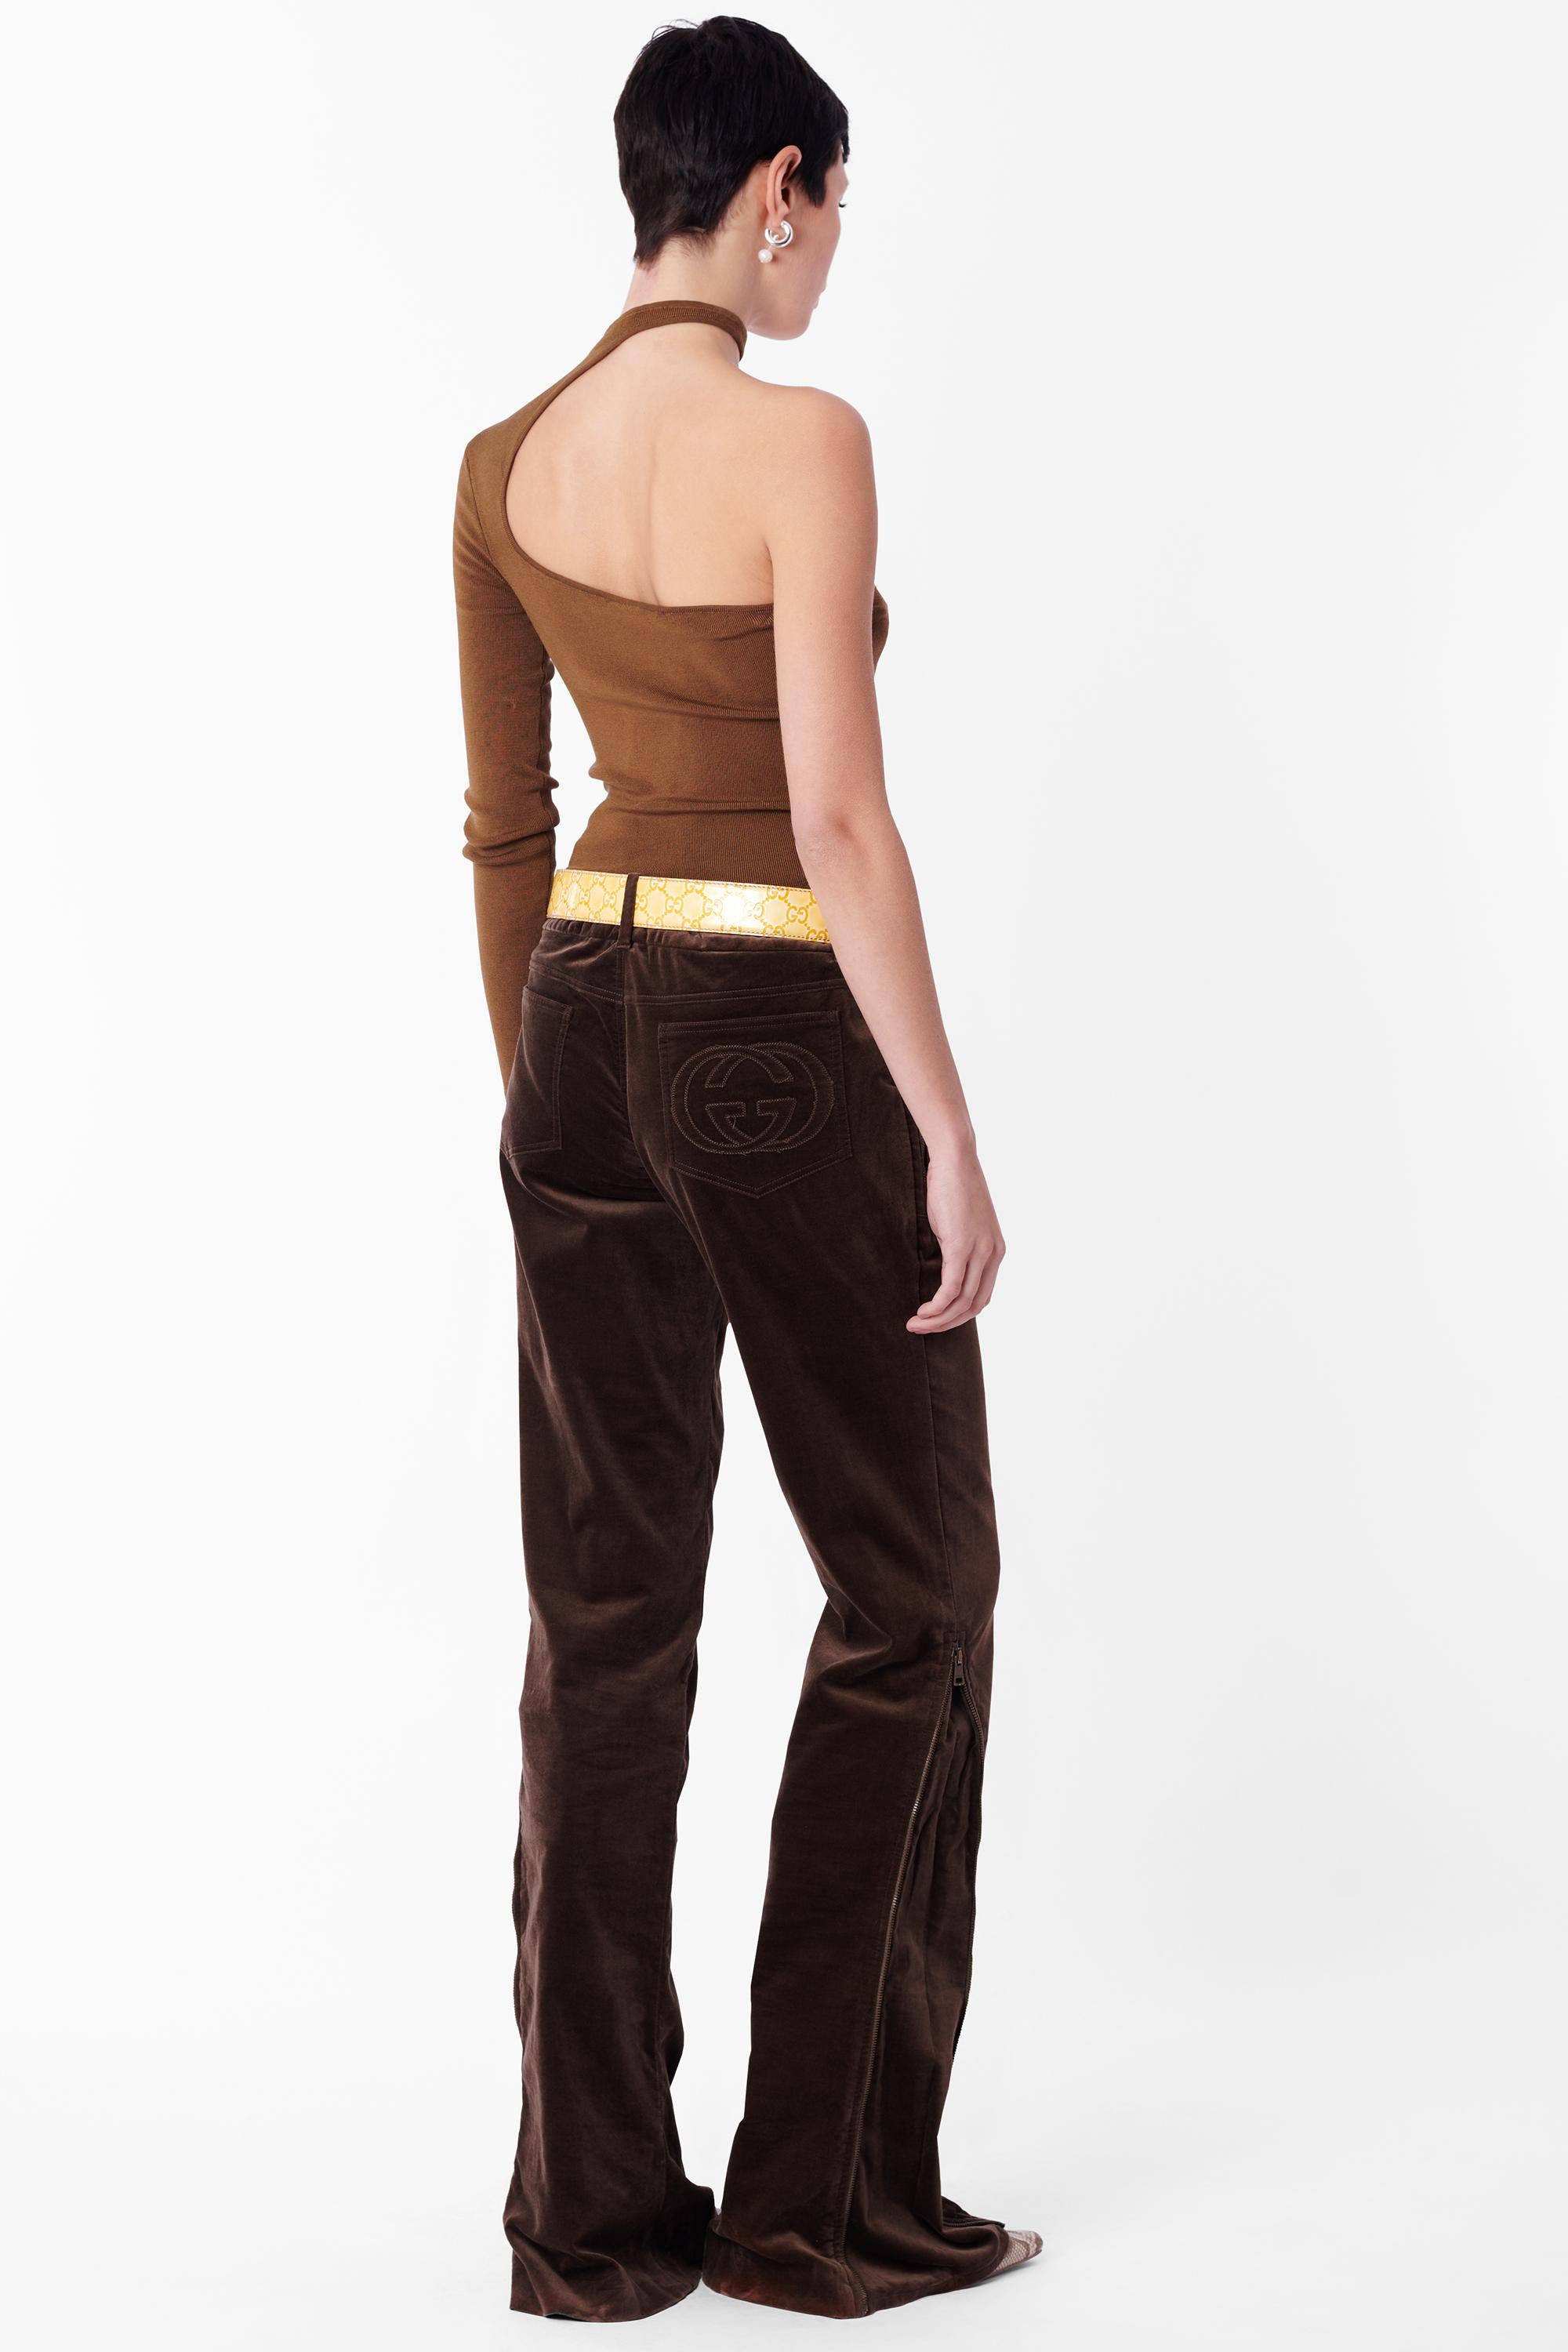 Tom Ford for Gucci Fall Winter 2003 low waisted brown velvet trousers. Features zip on each side legs, double flat front hip pockets with zips, straight leg, two back pockets, embossed Gucci GG logo on the right side back pocket. In excellent